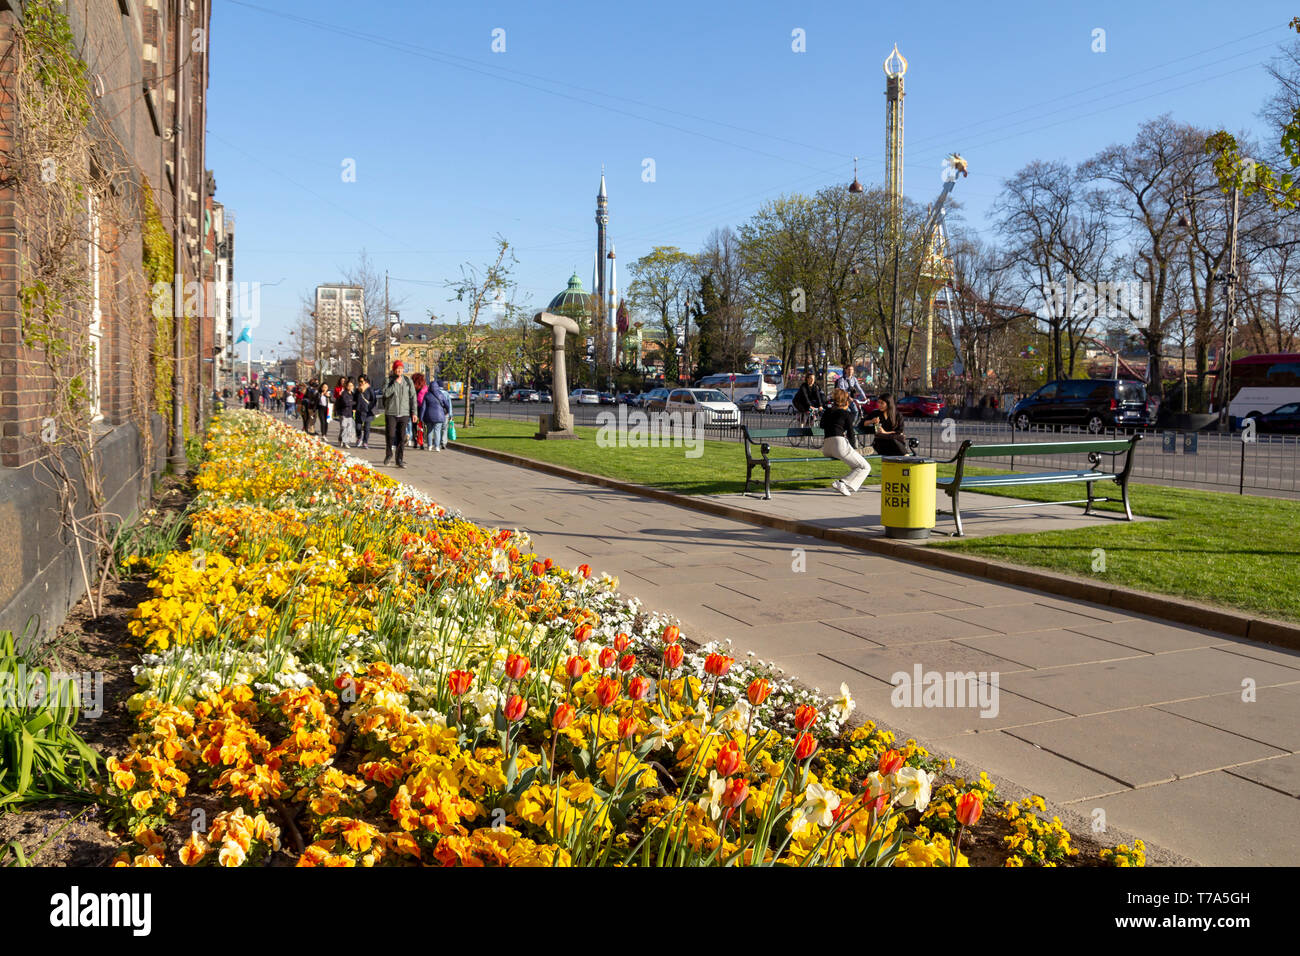 People walking in the street with beautiful flowers, next to the Tivoli amusement park in the city of Copenhagen Stock Photo